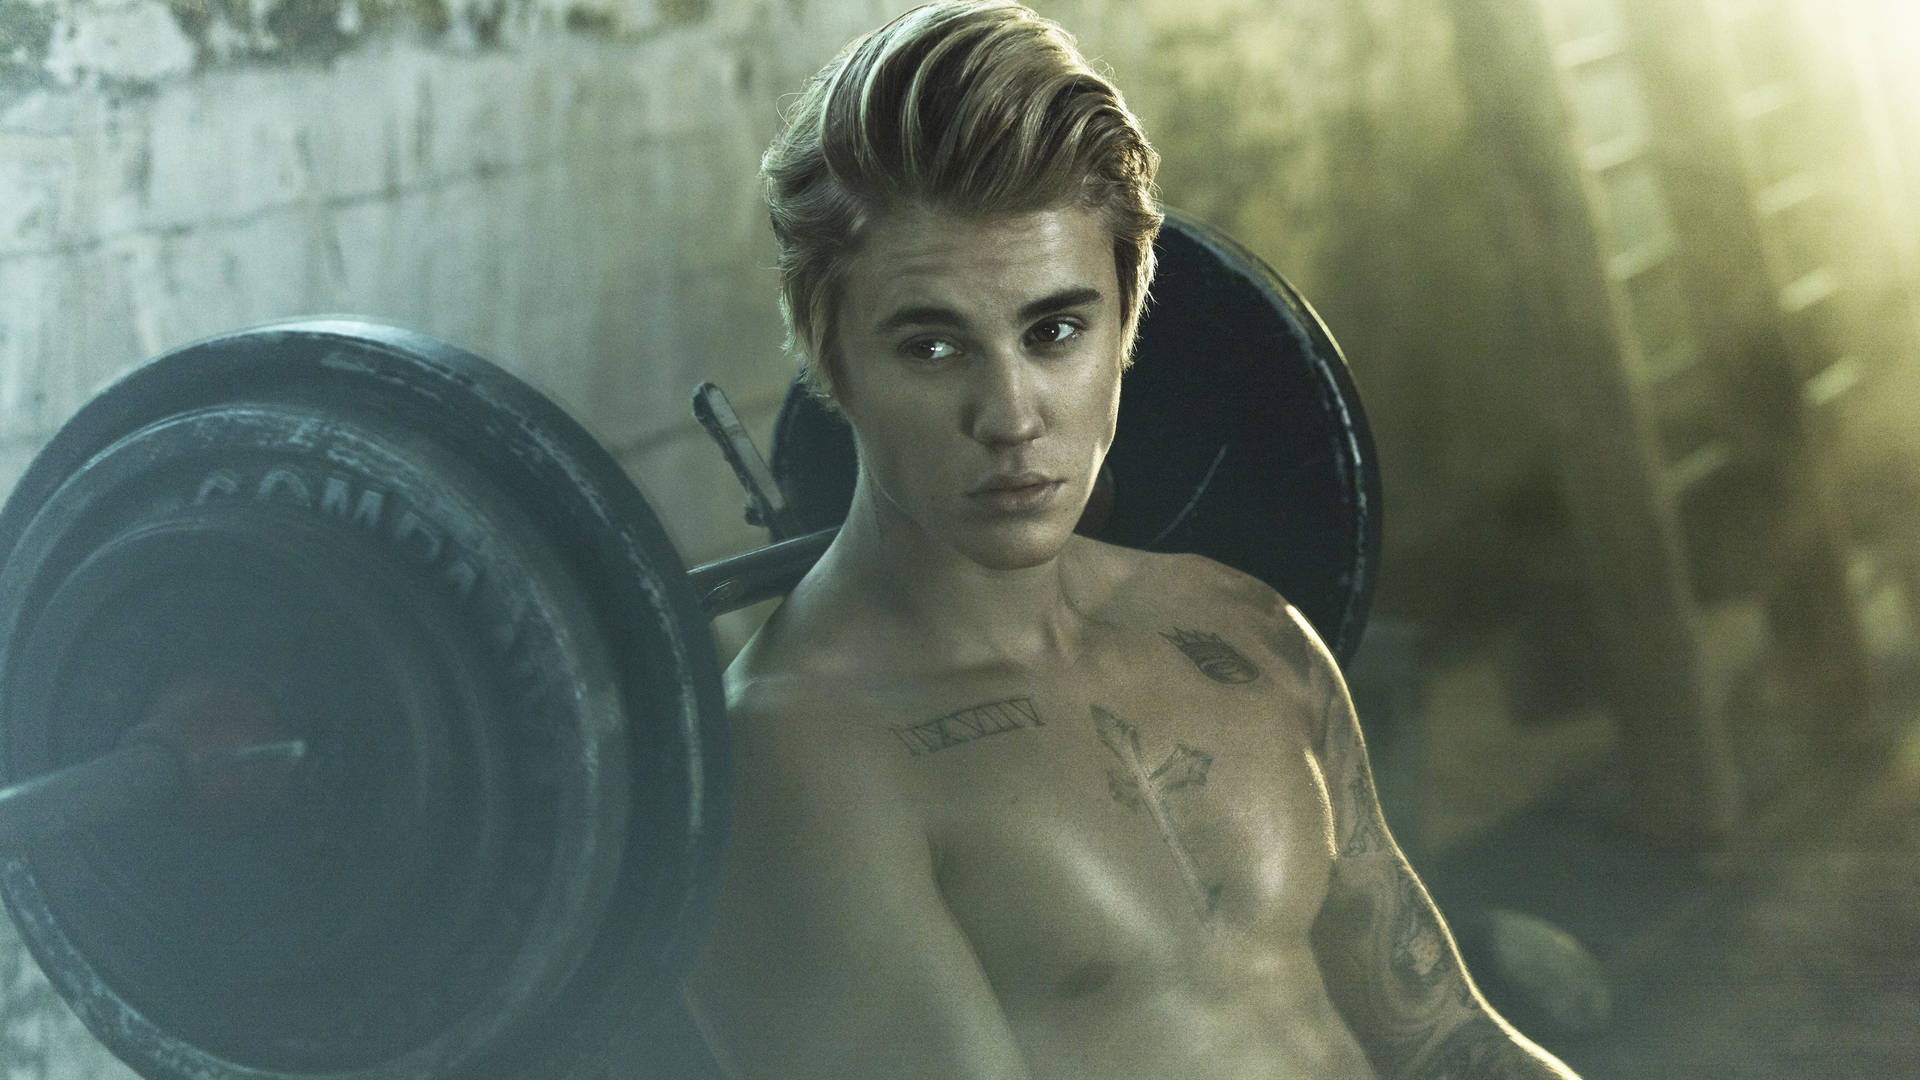 "World-renowned pop star Justin Bieber shows off his amazing gym body." Wallpaper